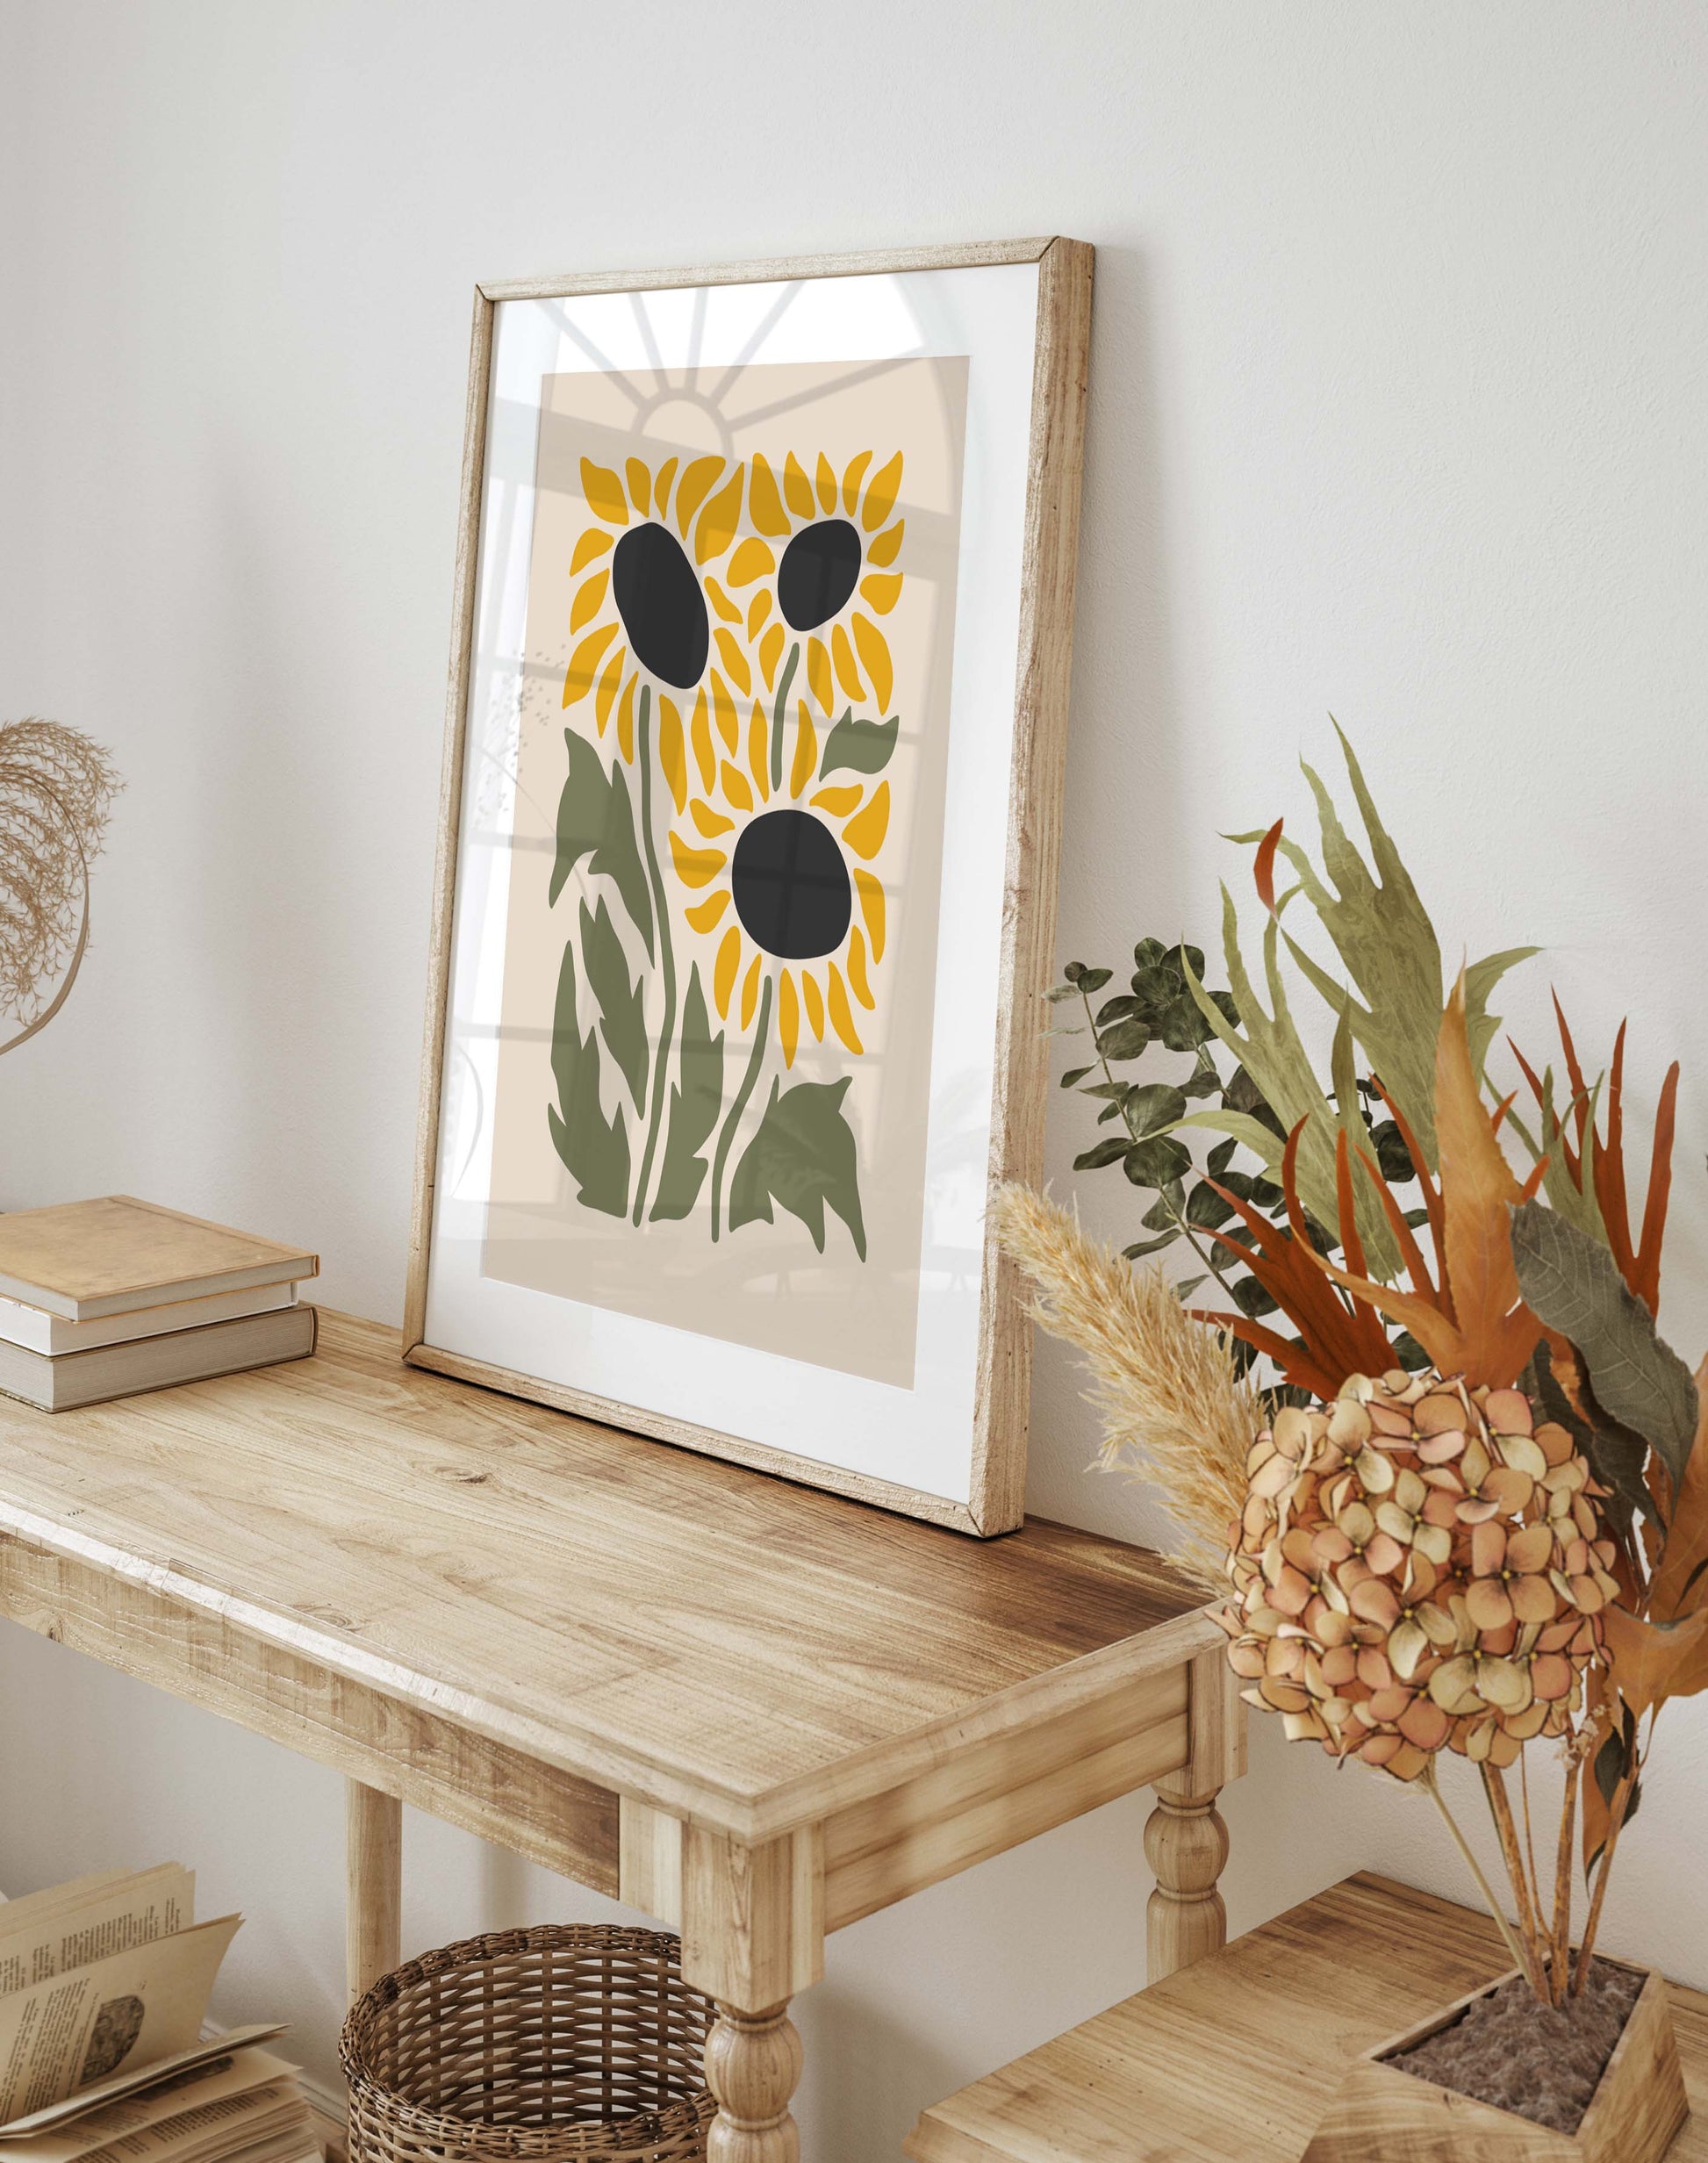 Sunflower print in yellow and green in a minimalist style